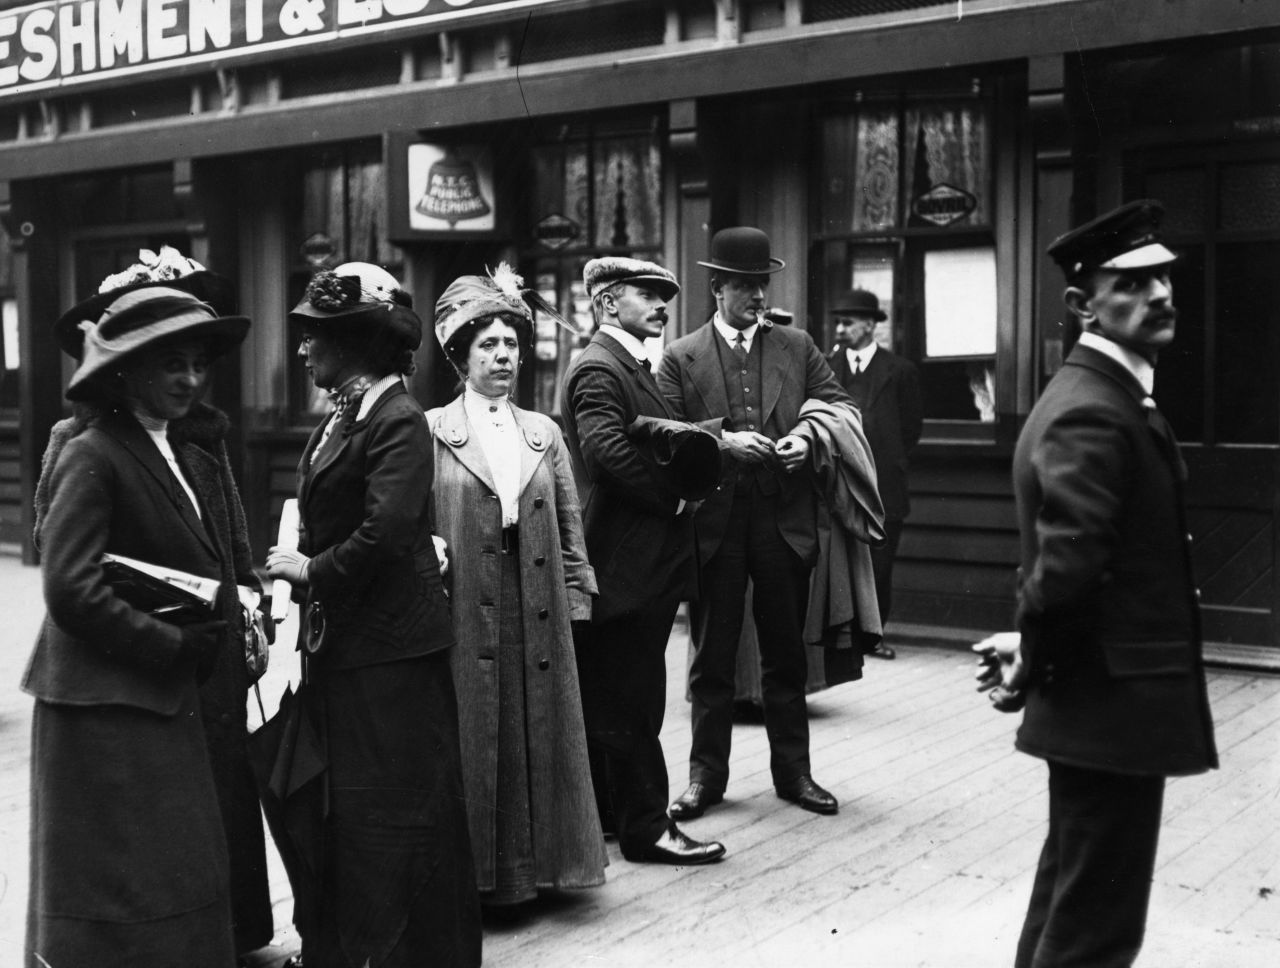 Survivors of the Titanic catastrophe arrive in Liverpool, England, in May 1912. Third Officer William Pitman, in the cap, stands on the right.